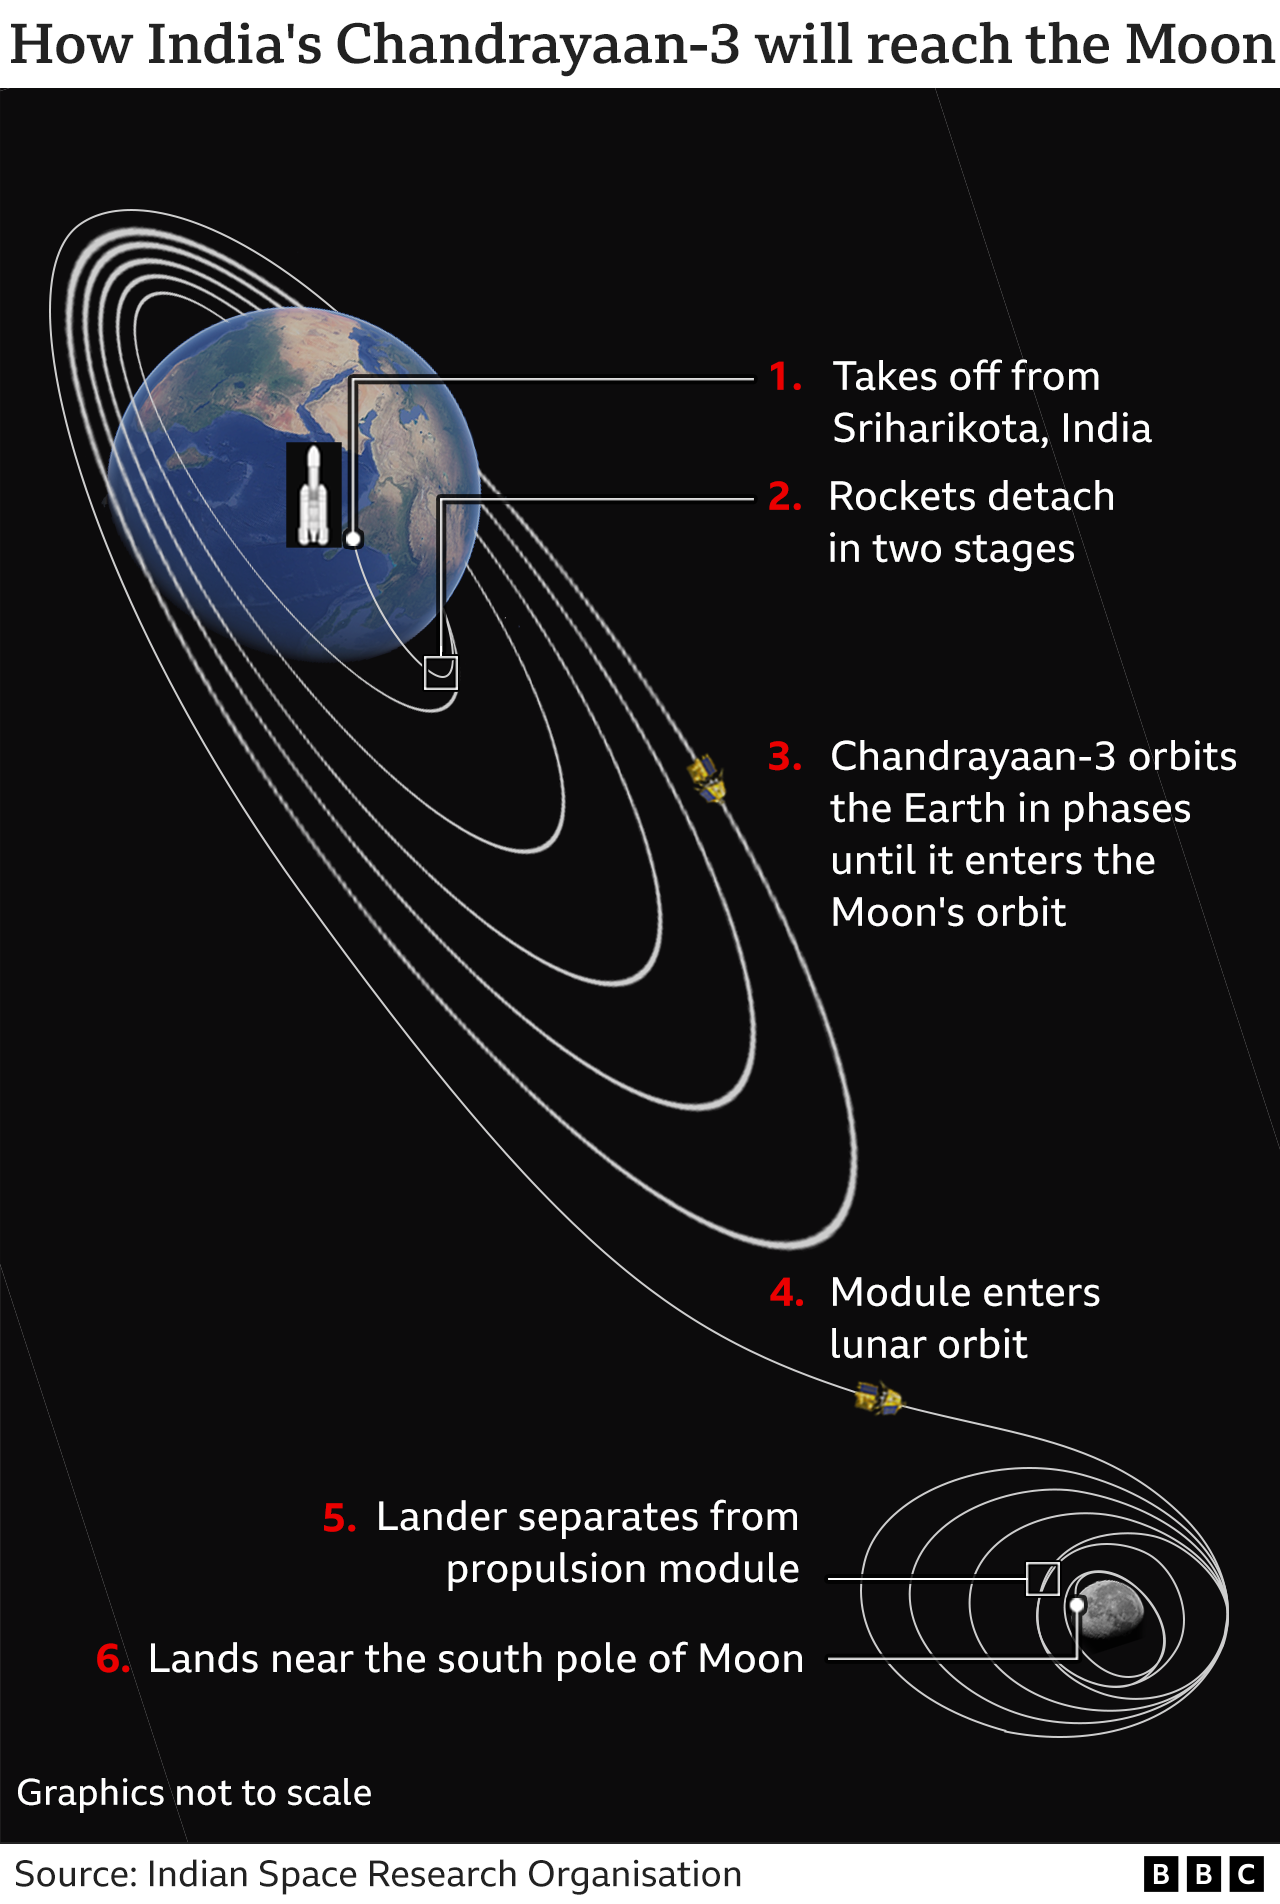 Graphic showing how the Chandrayaan-3 will get to the Moon, from take off, to orbiting the Earth in phases until it reaches the Moon's orbit, when the lander will separate from the propulsion module before landing near the Moon's south pole